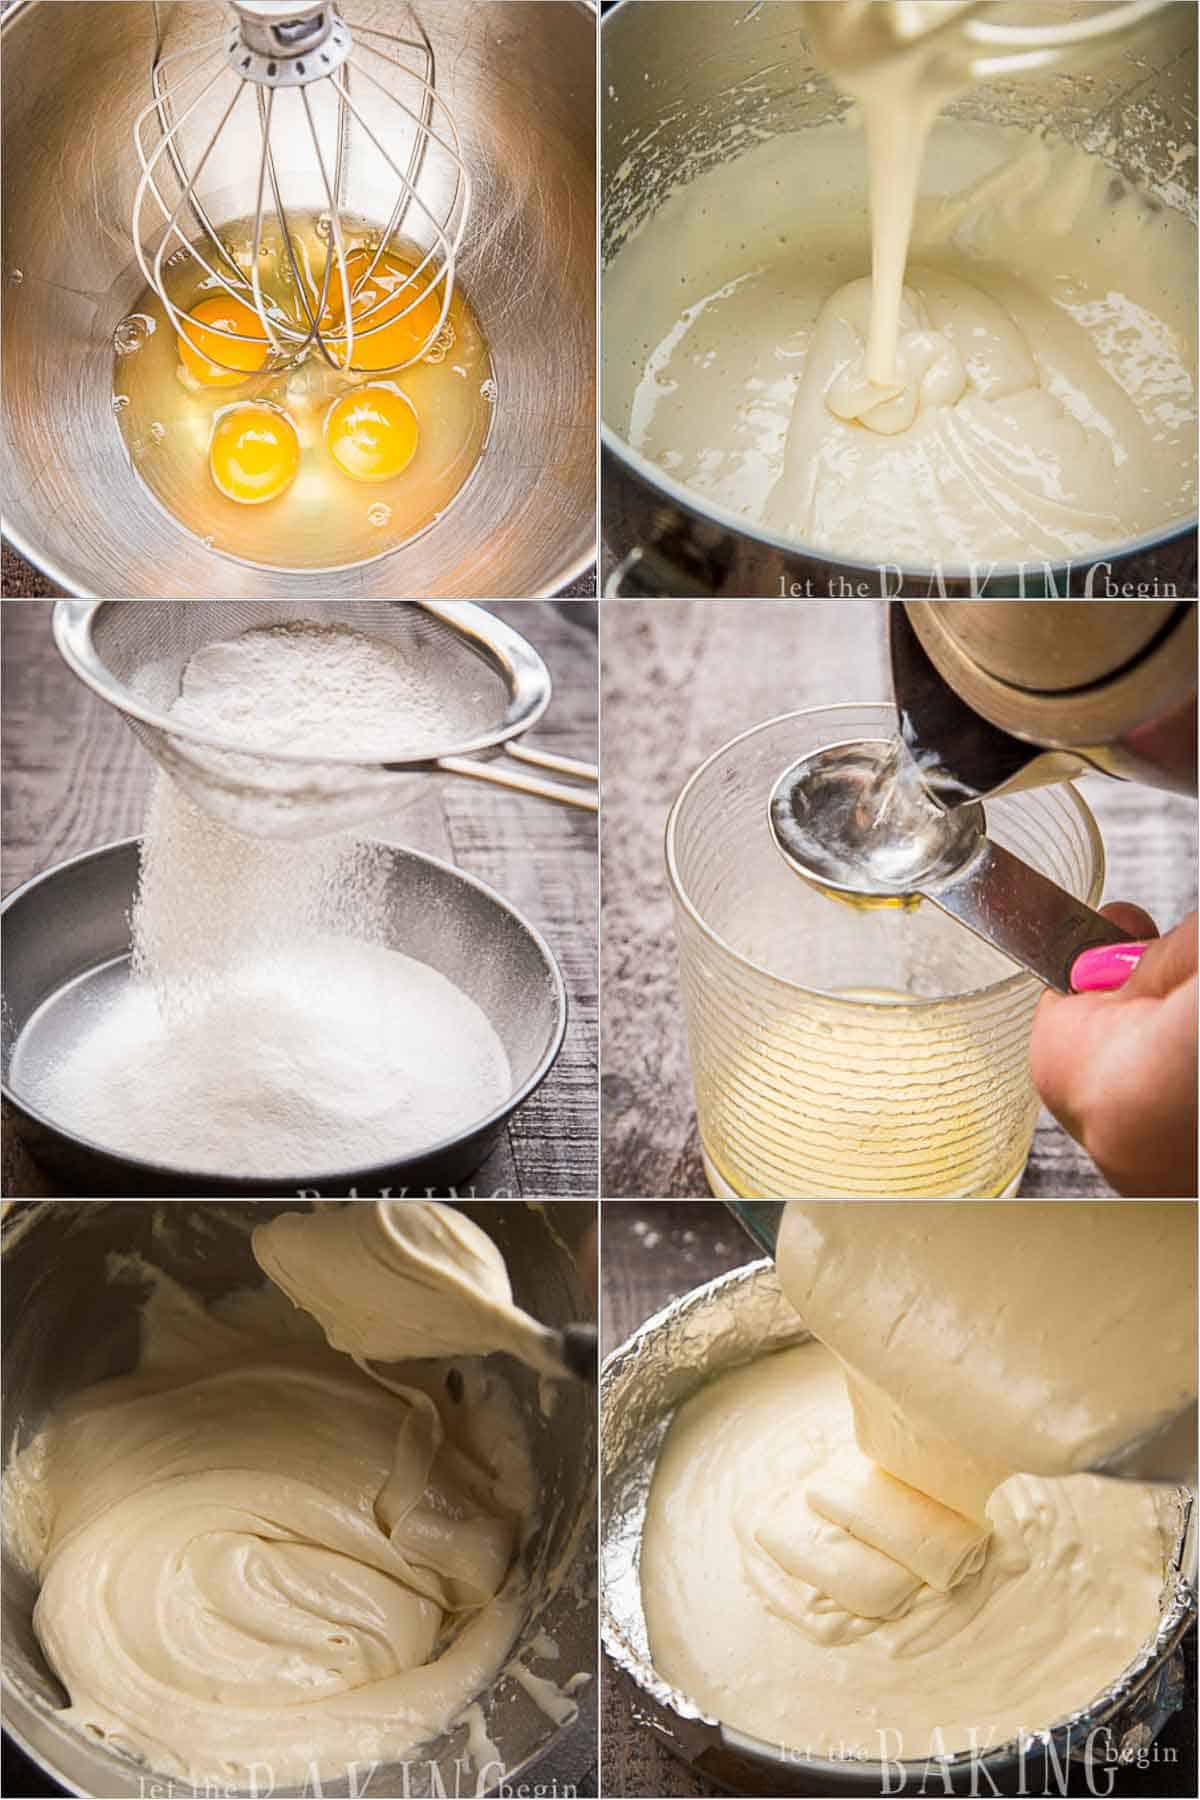 Sponge Cake Step by step pictures